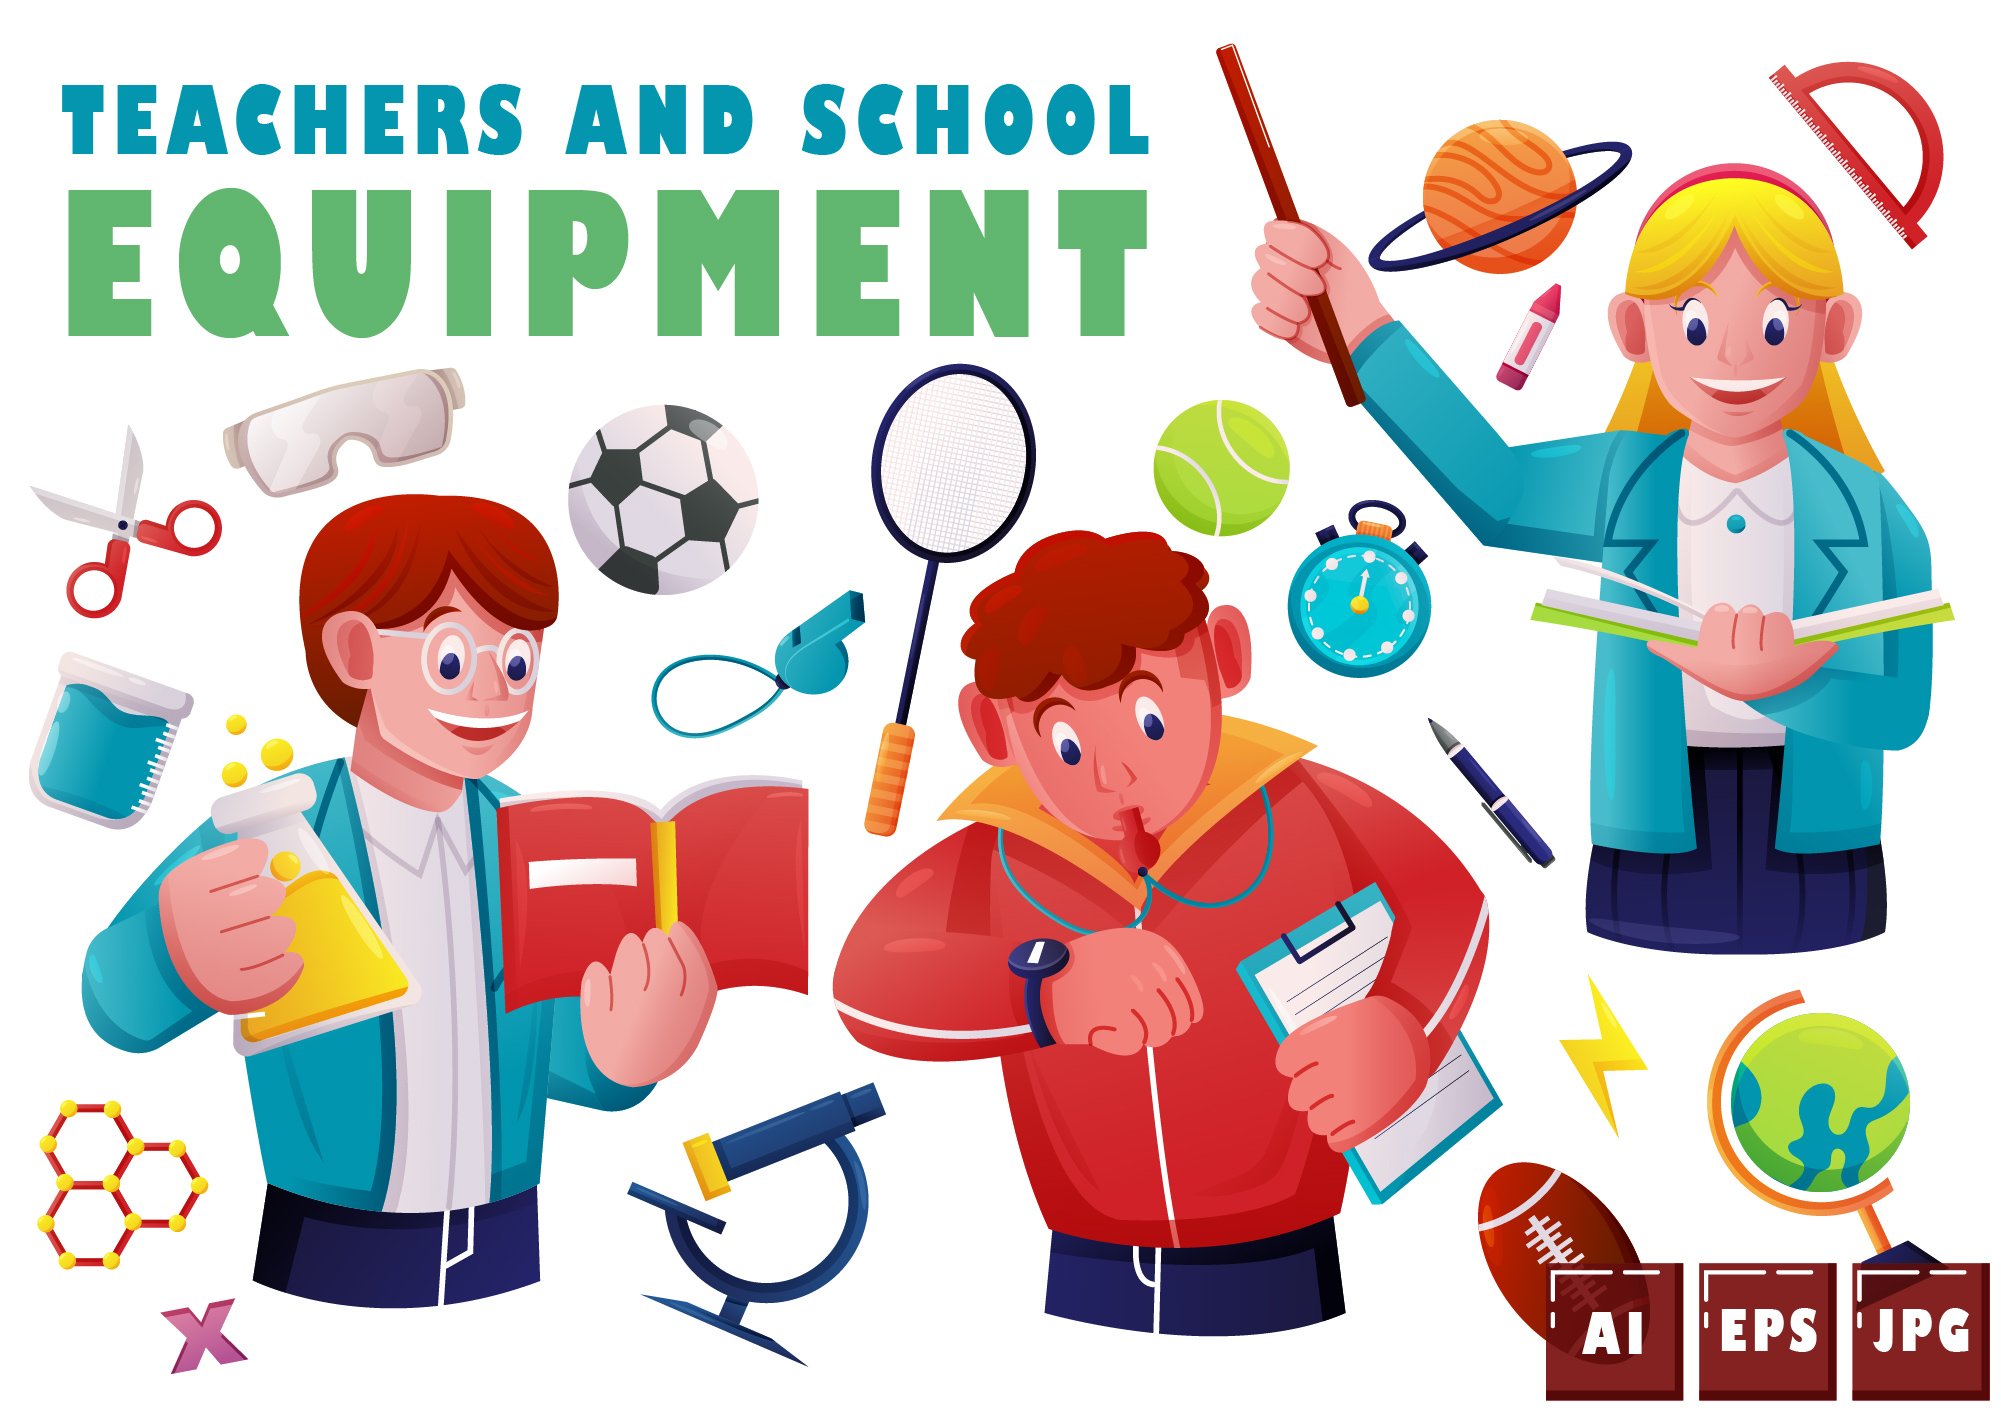 Teachers and school equipment cover image.